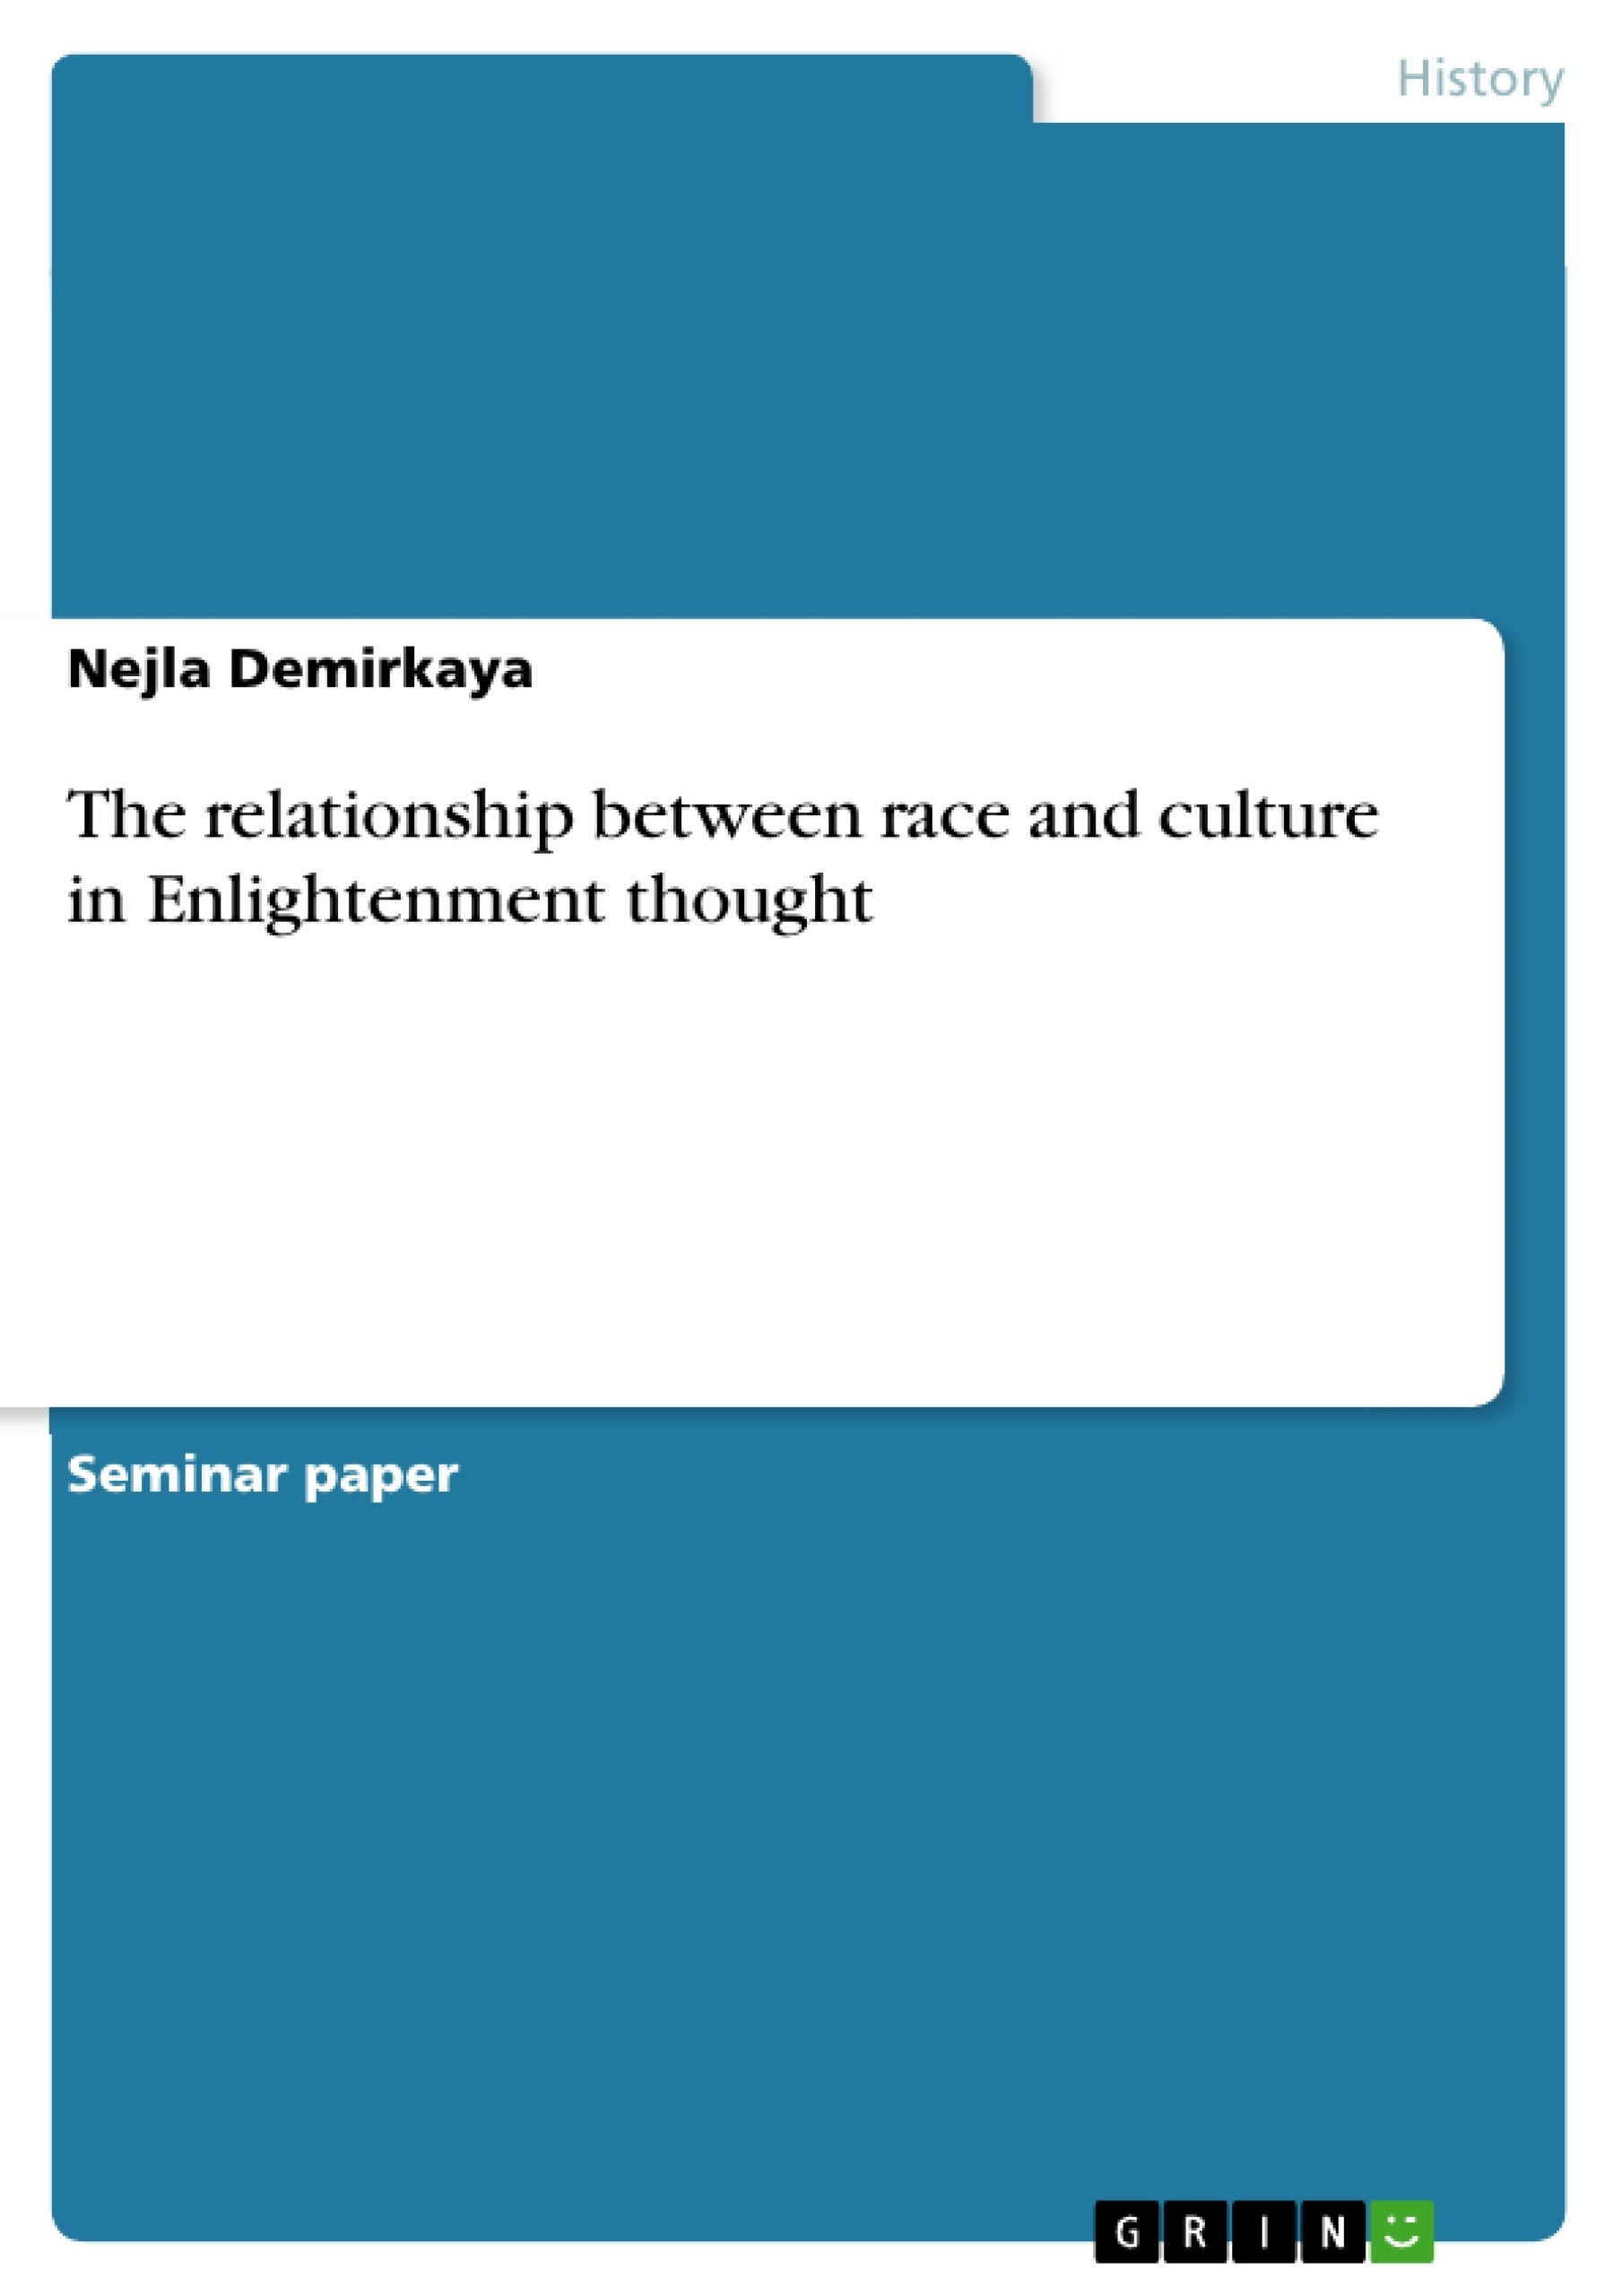 Title: The relationship between race and culture in Enlightenment thought